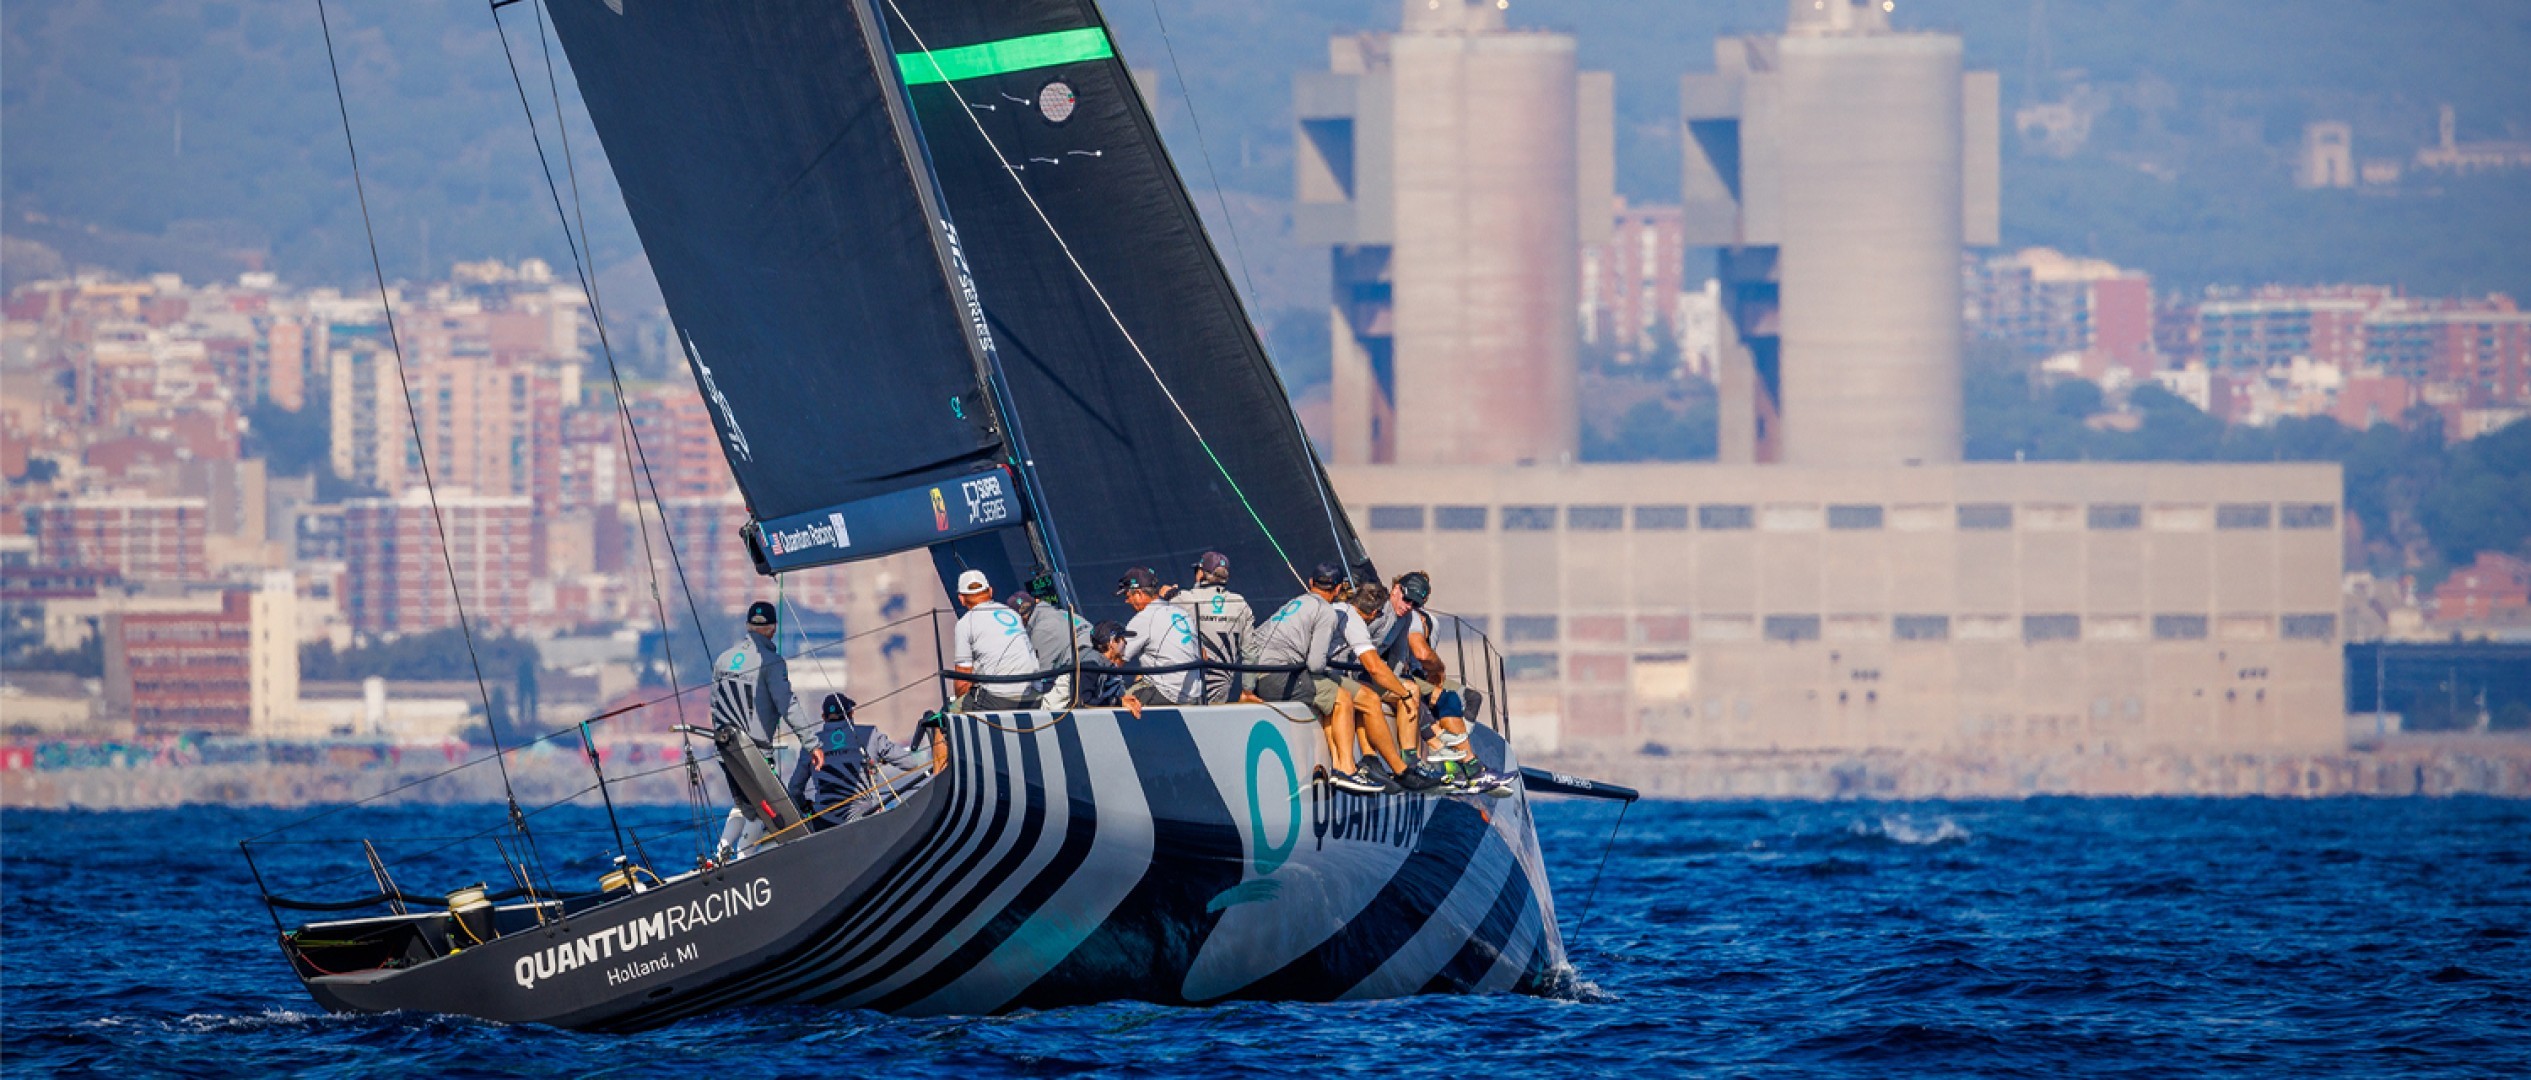 New look, new faces for the 52 Super Series champions